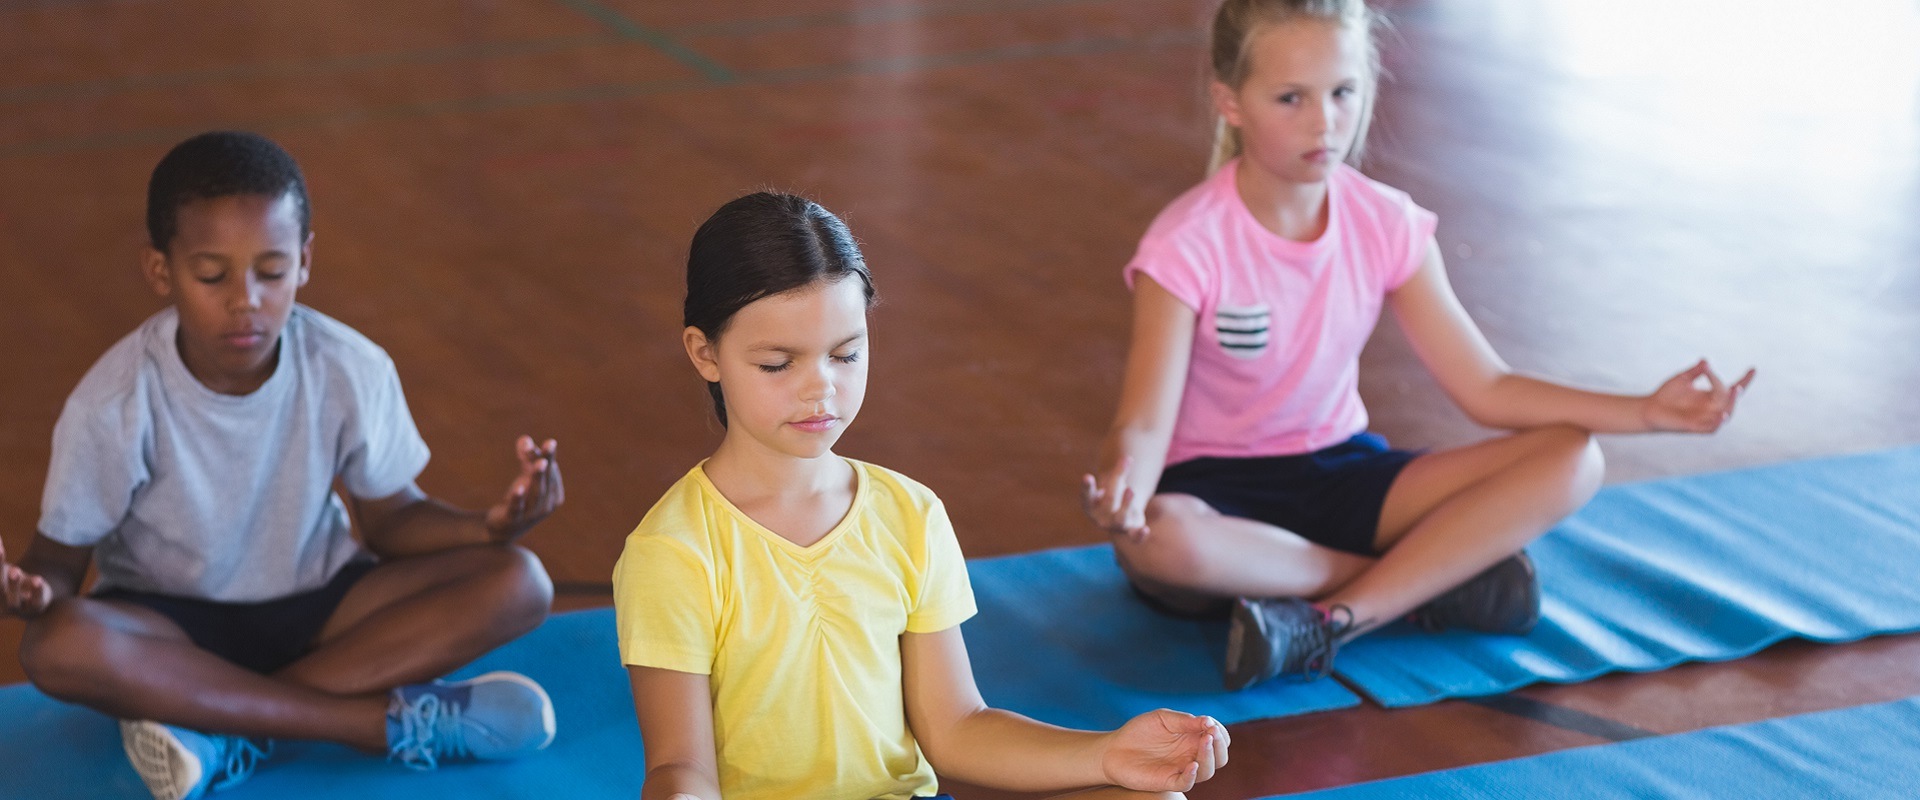 Mindfulness for Teens: How to Practice and Benefit from It